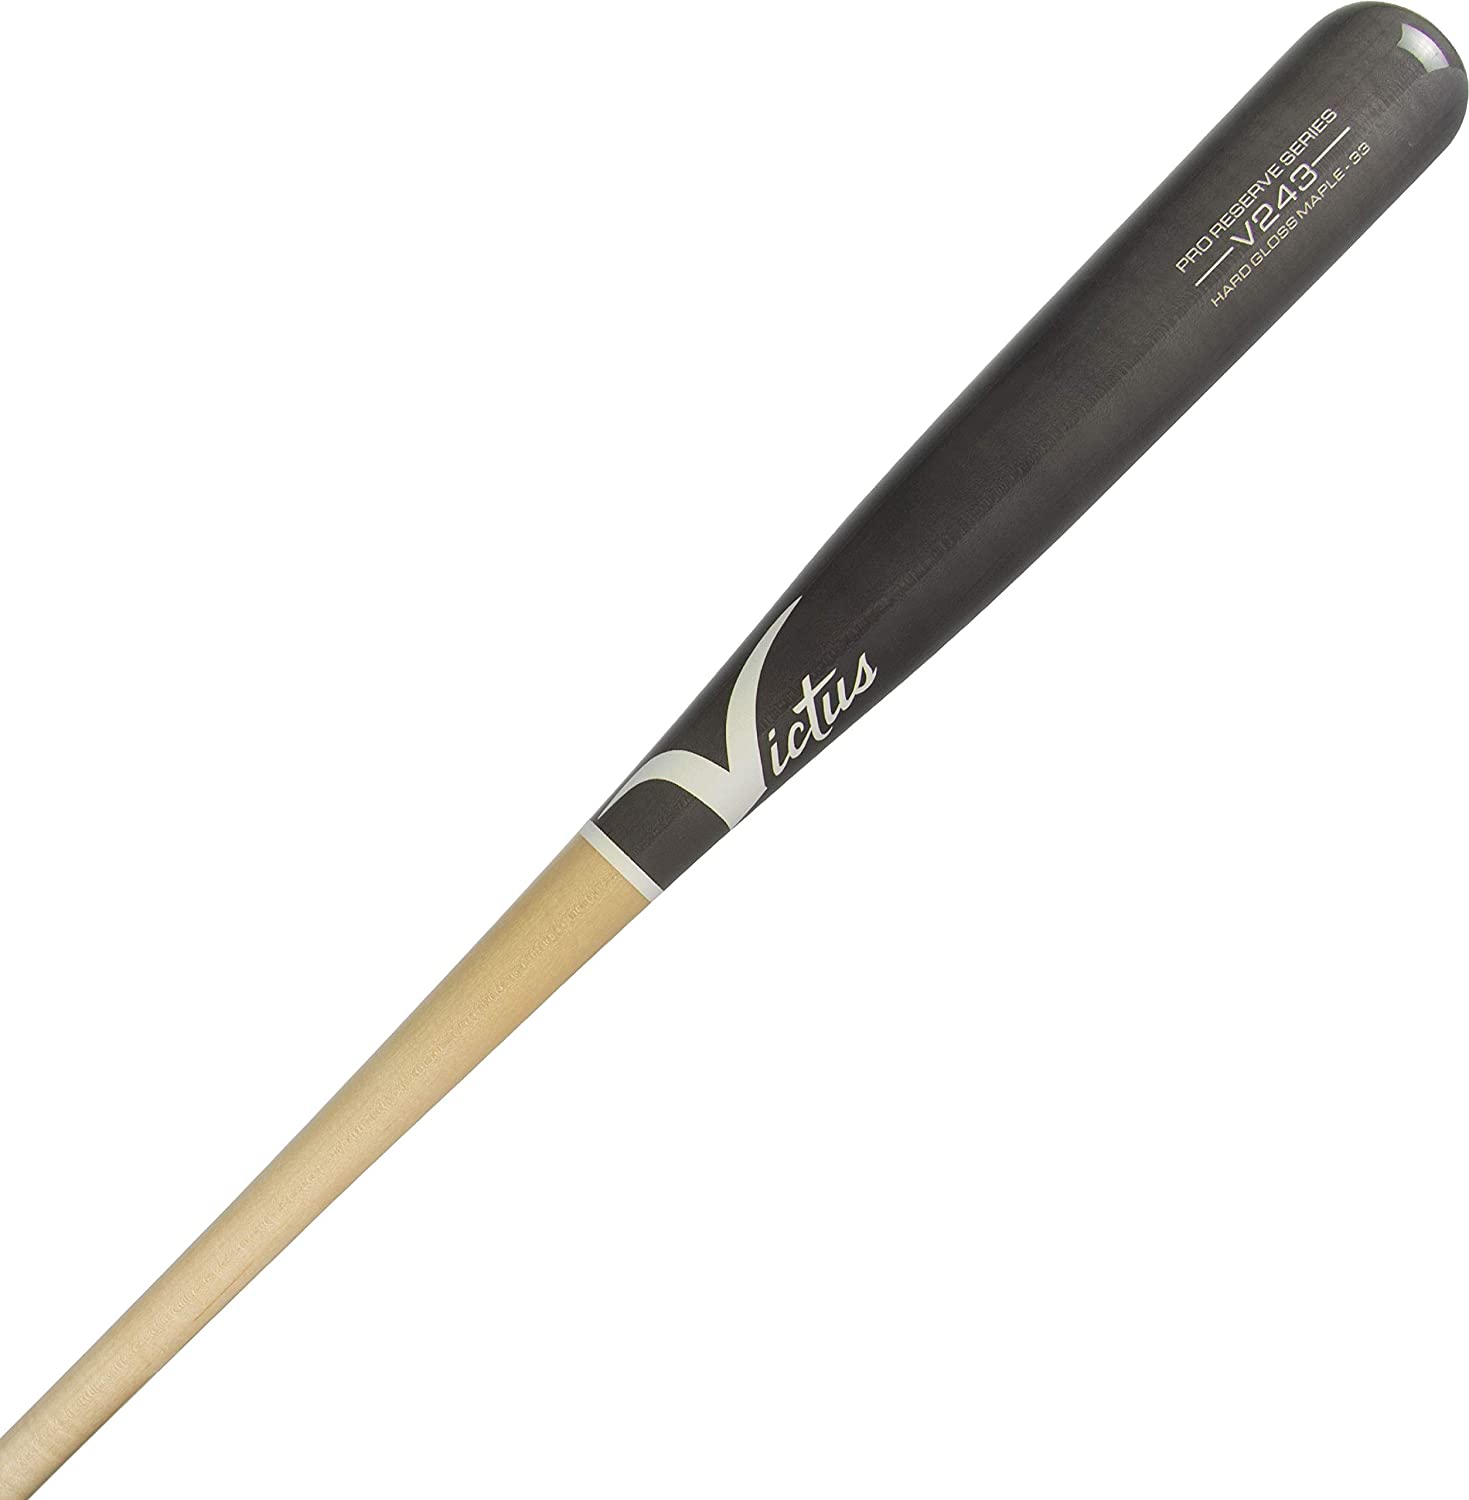 victus-v243-natural-gray-maple-pro-reserve-wood-baseball-bat-32-inch VRWMV243-NGY-32 Victus  Historically the 243 is the most popular large barrel bat for